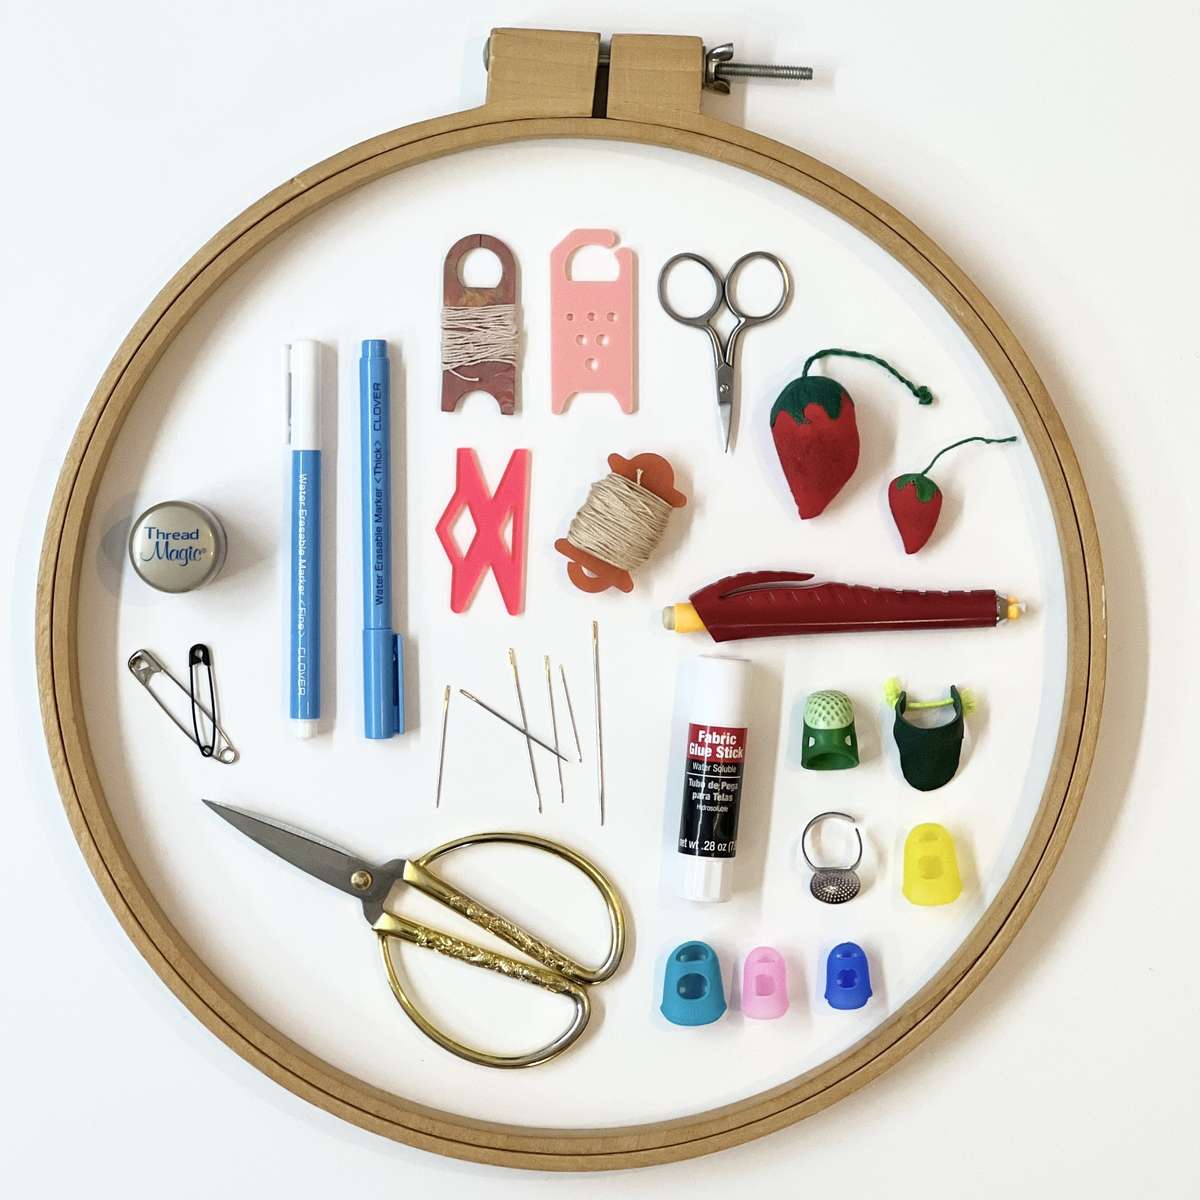 Embroidery tools online puzzle